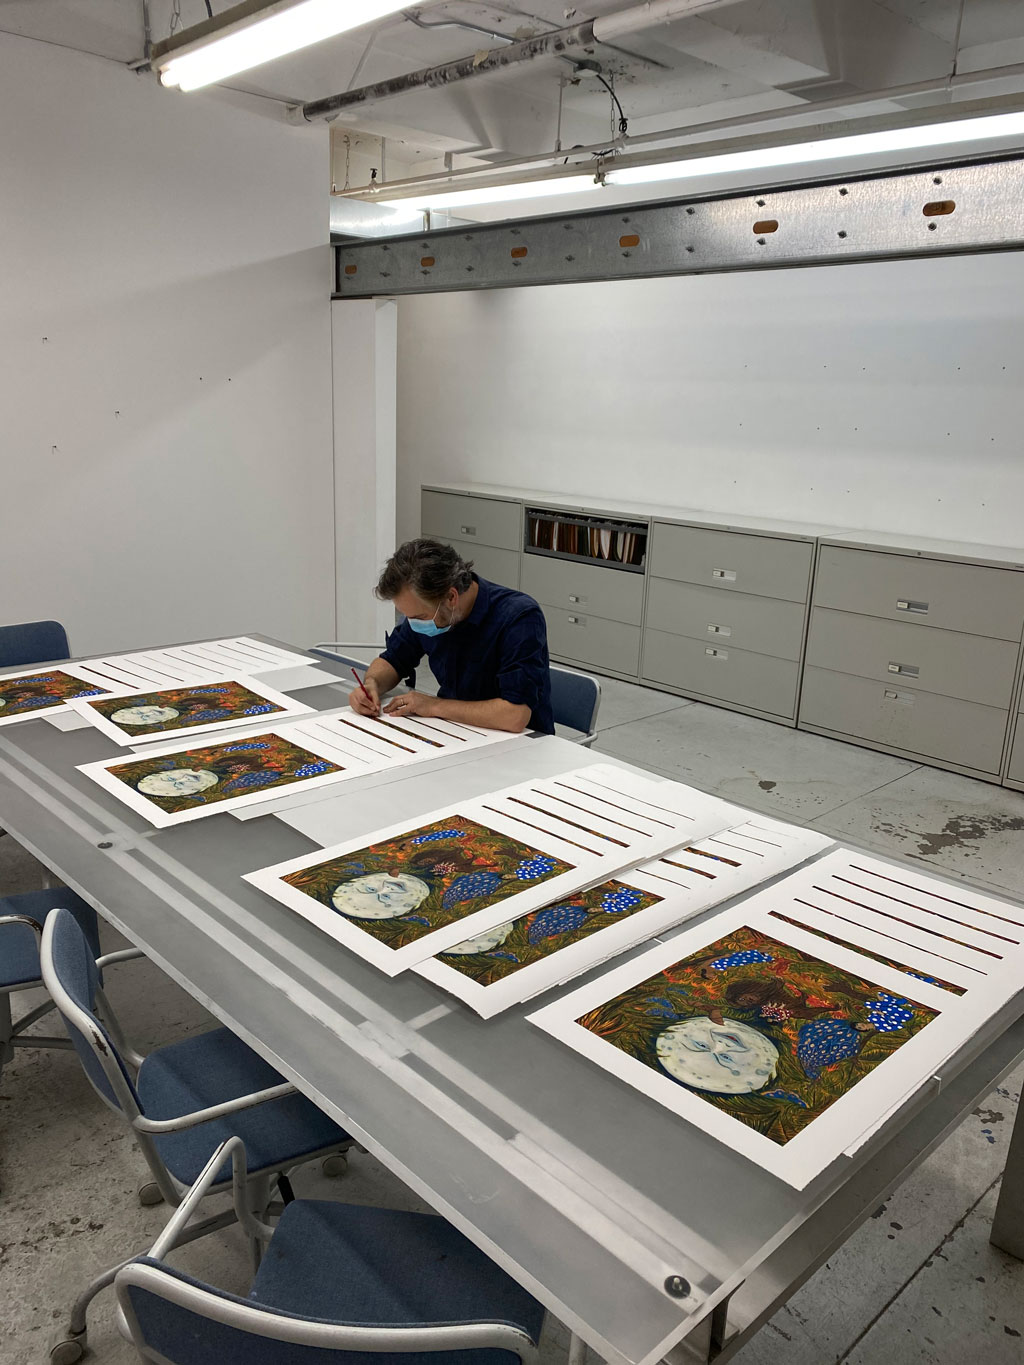 Marcel Dzama signing his Artspace/ RxART limited edition The Illumination of the sisters of paradise, 2020 at Lower East Side Printshop, October 2020